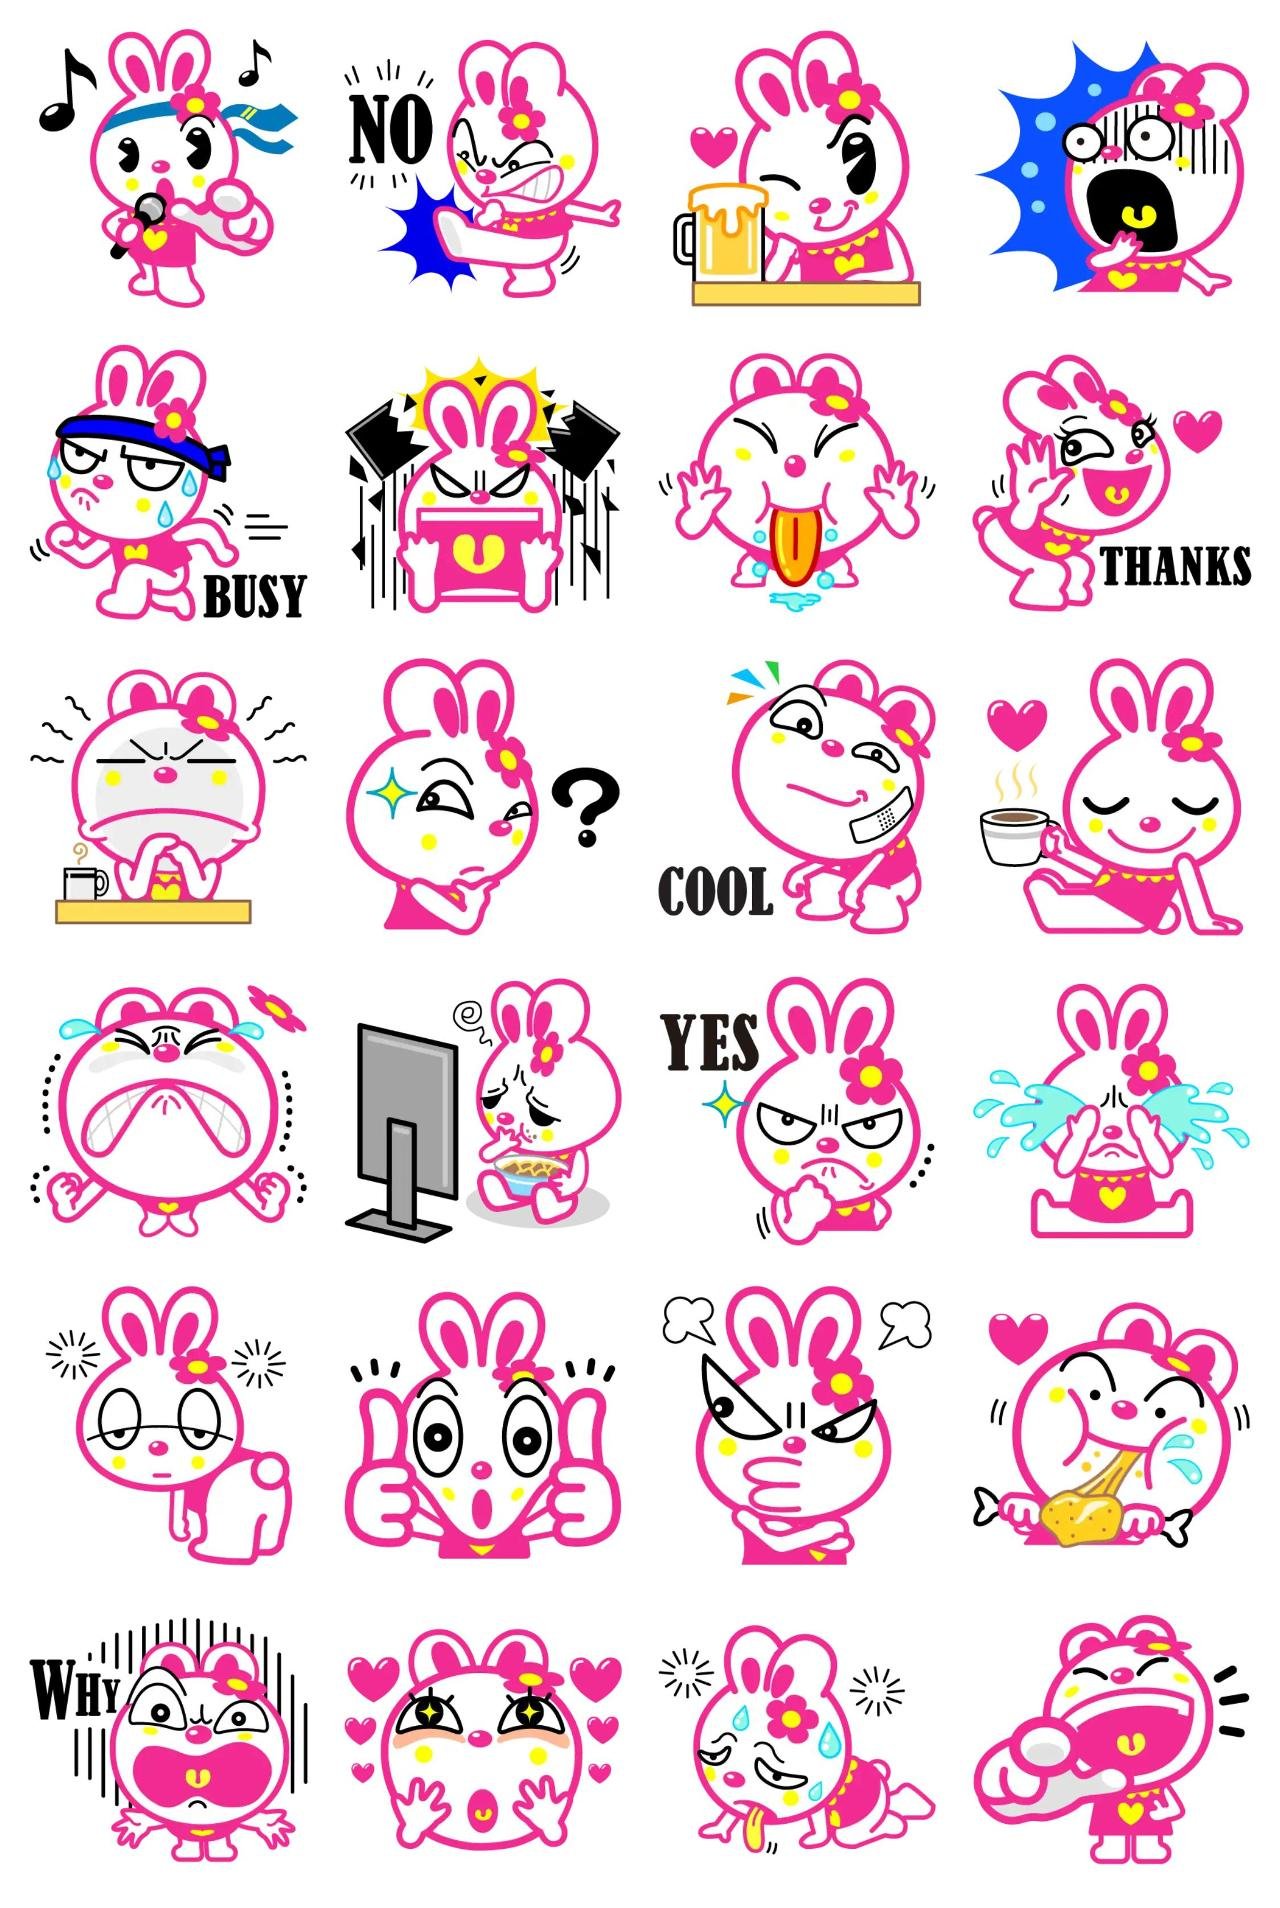 Positive Rabbit Hipani 4 Animals sticker pack for Whatsapp, Telegram, Signal, and others chatting and message apps